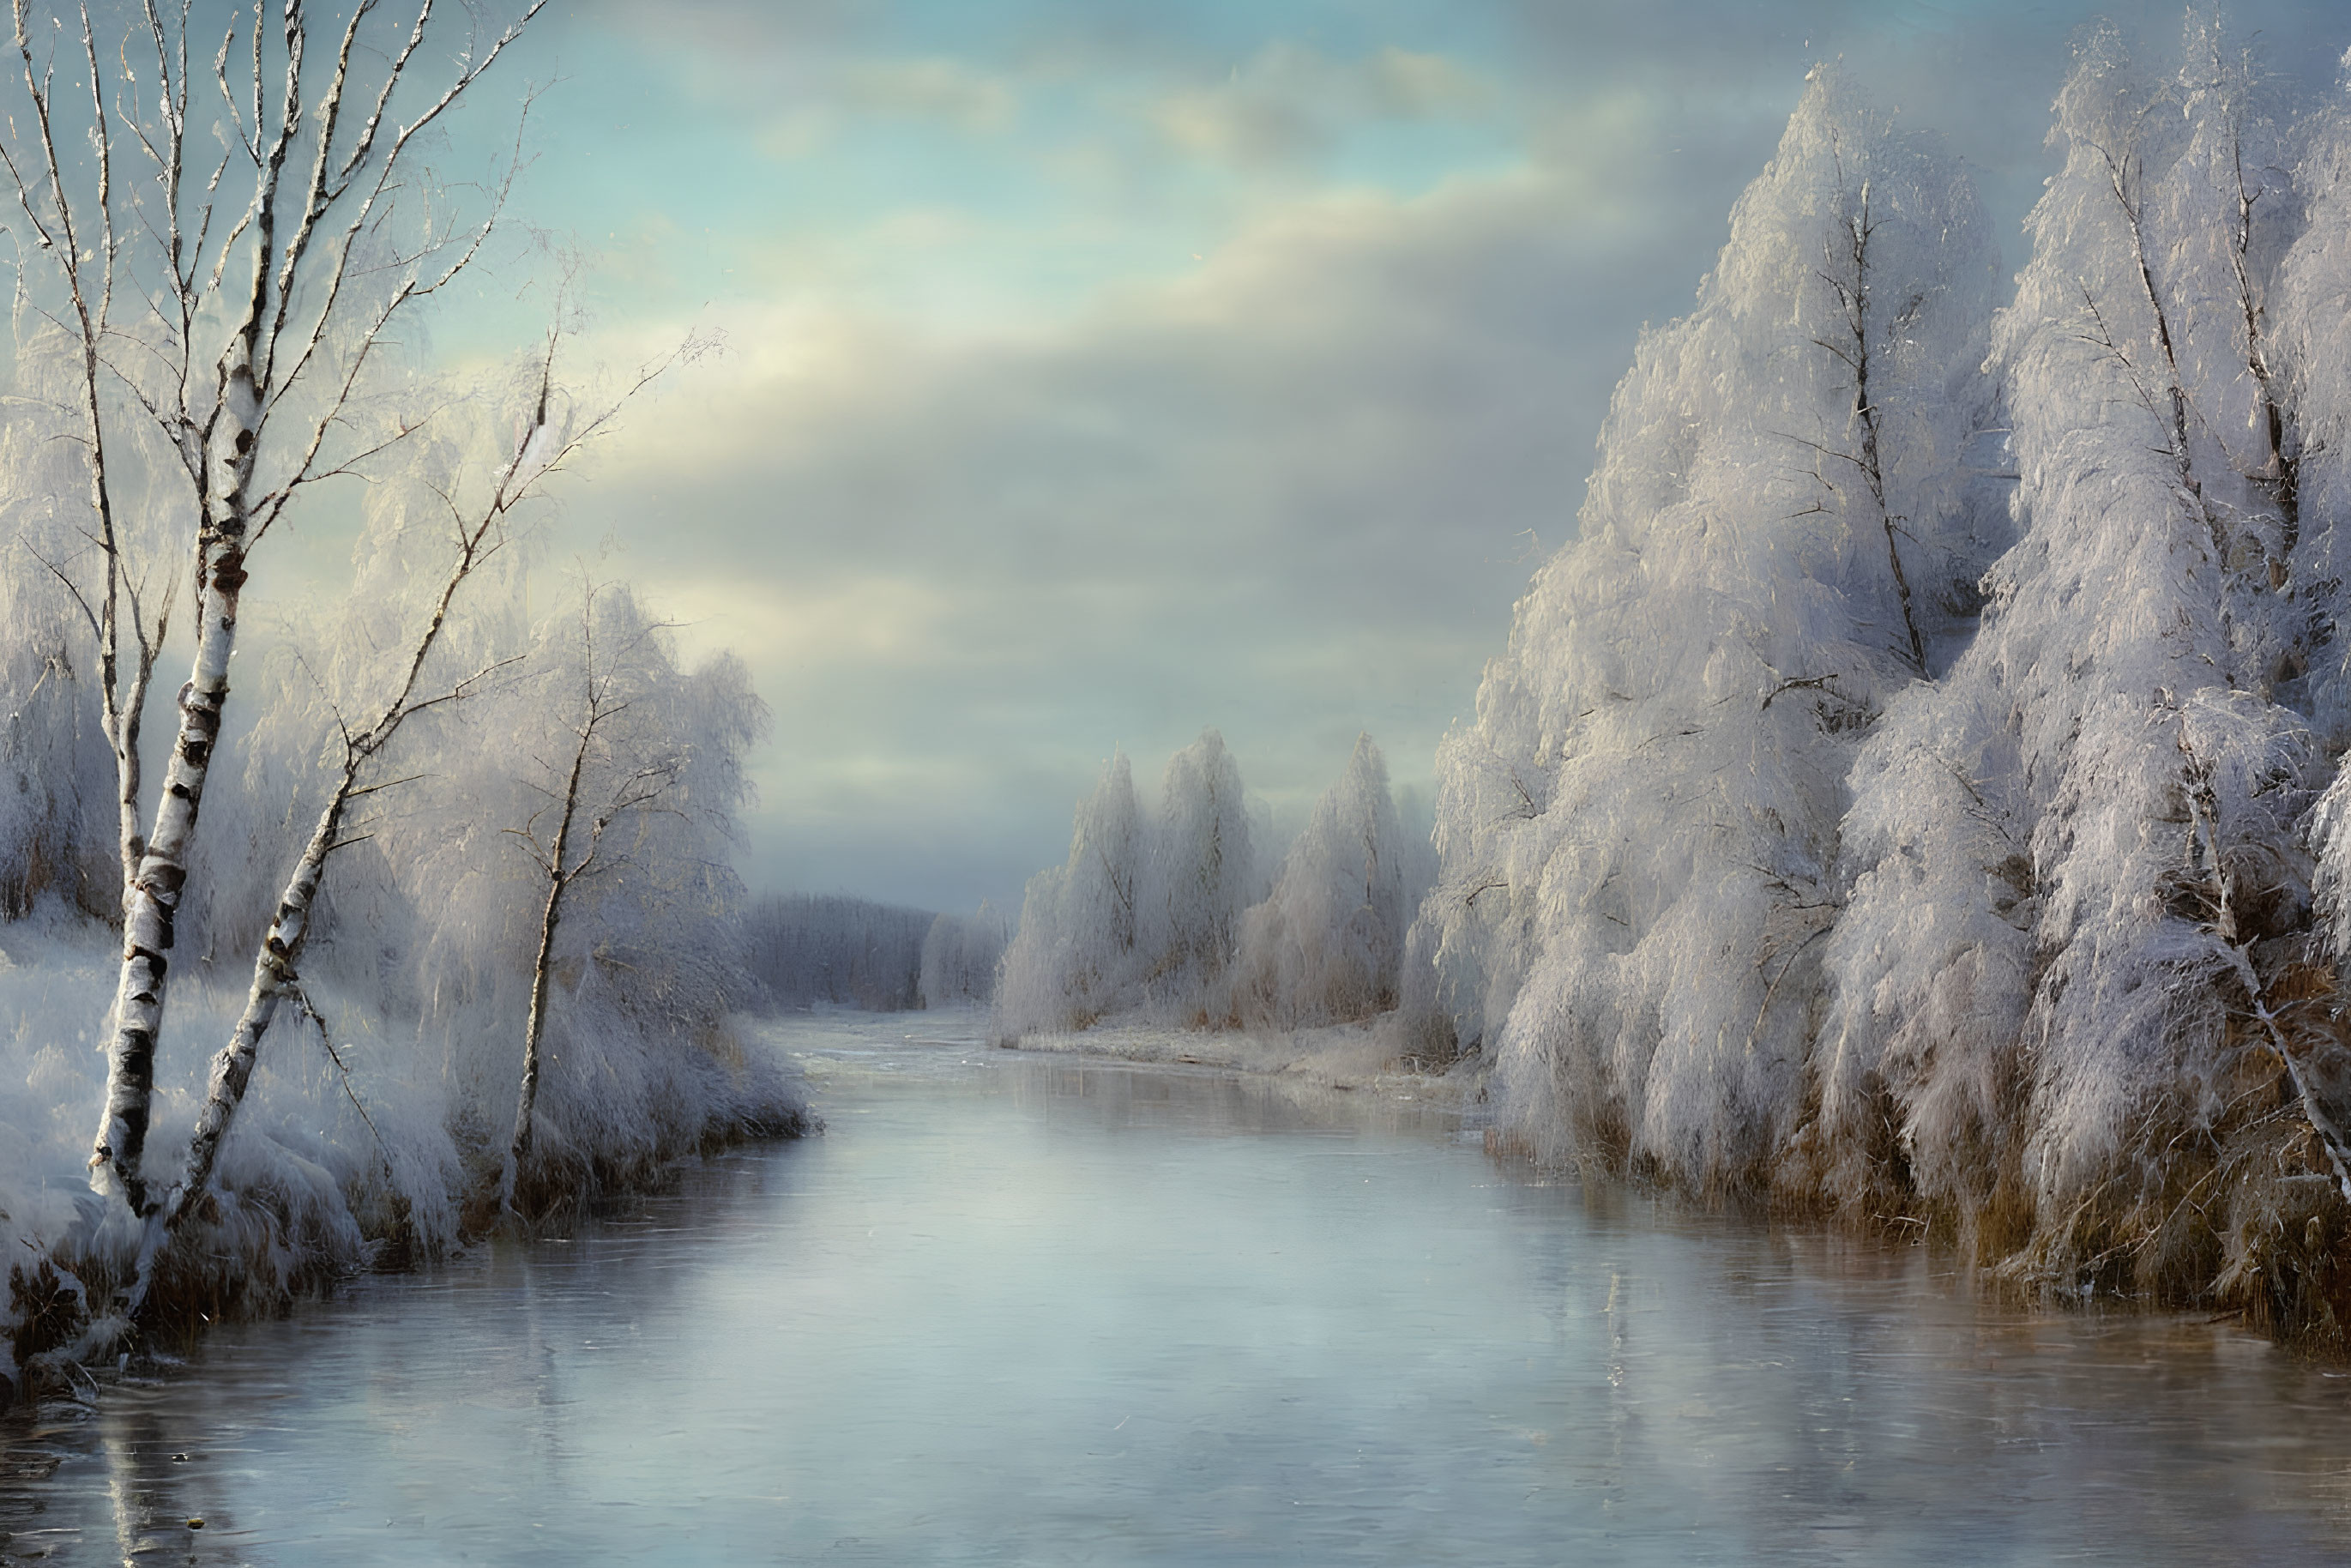 Snow-covered trees and river in serene winter landscape